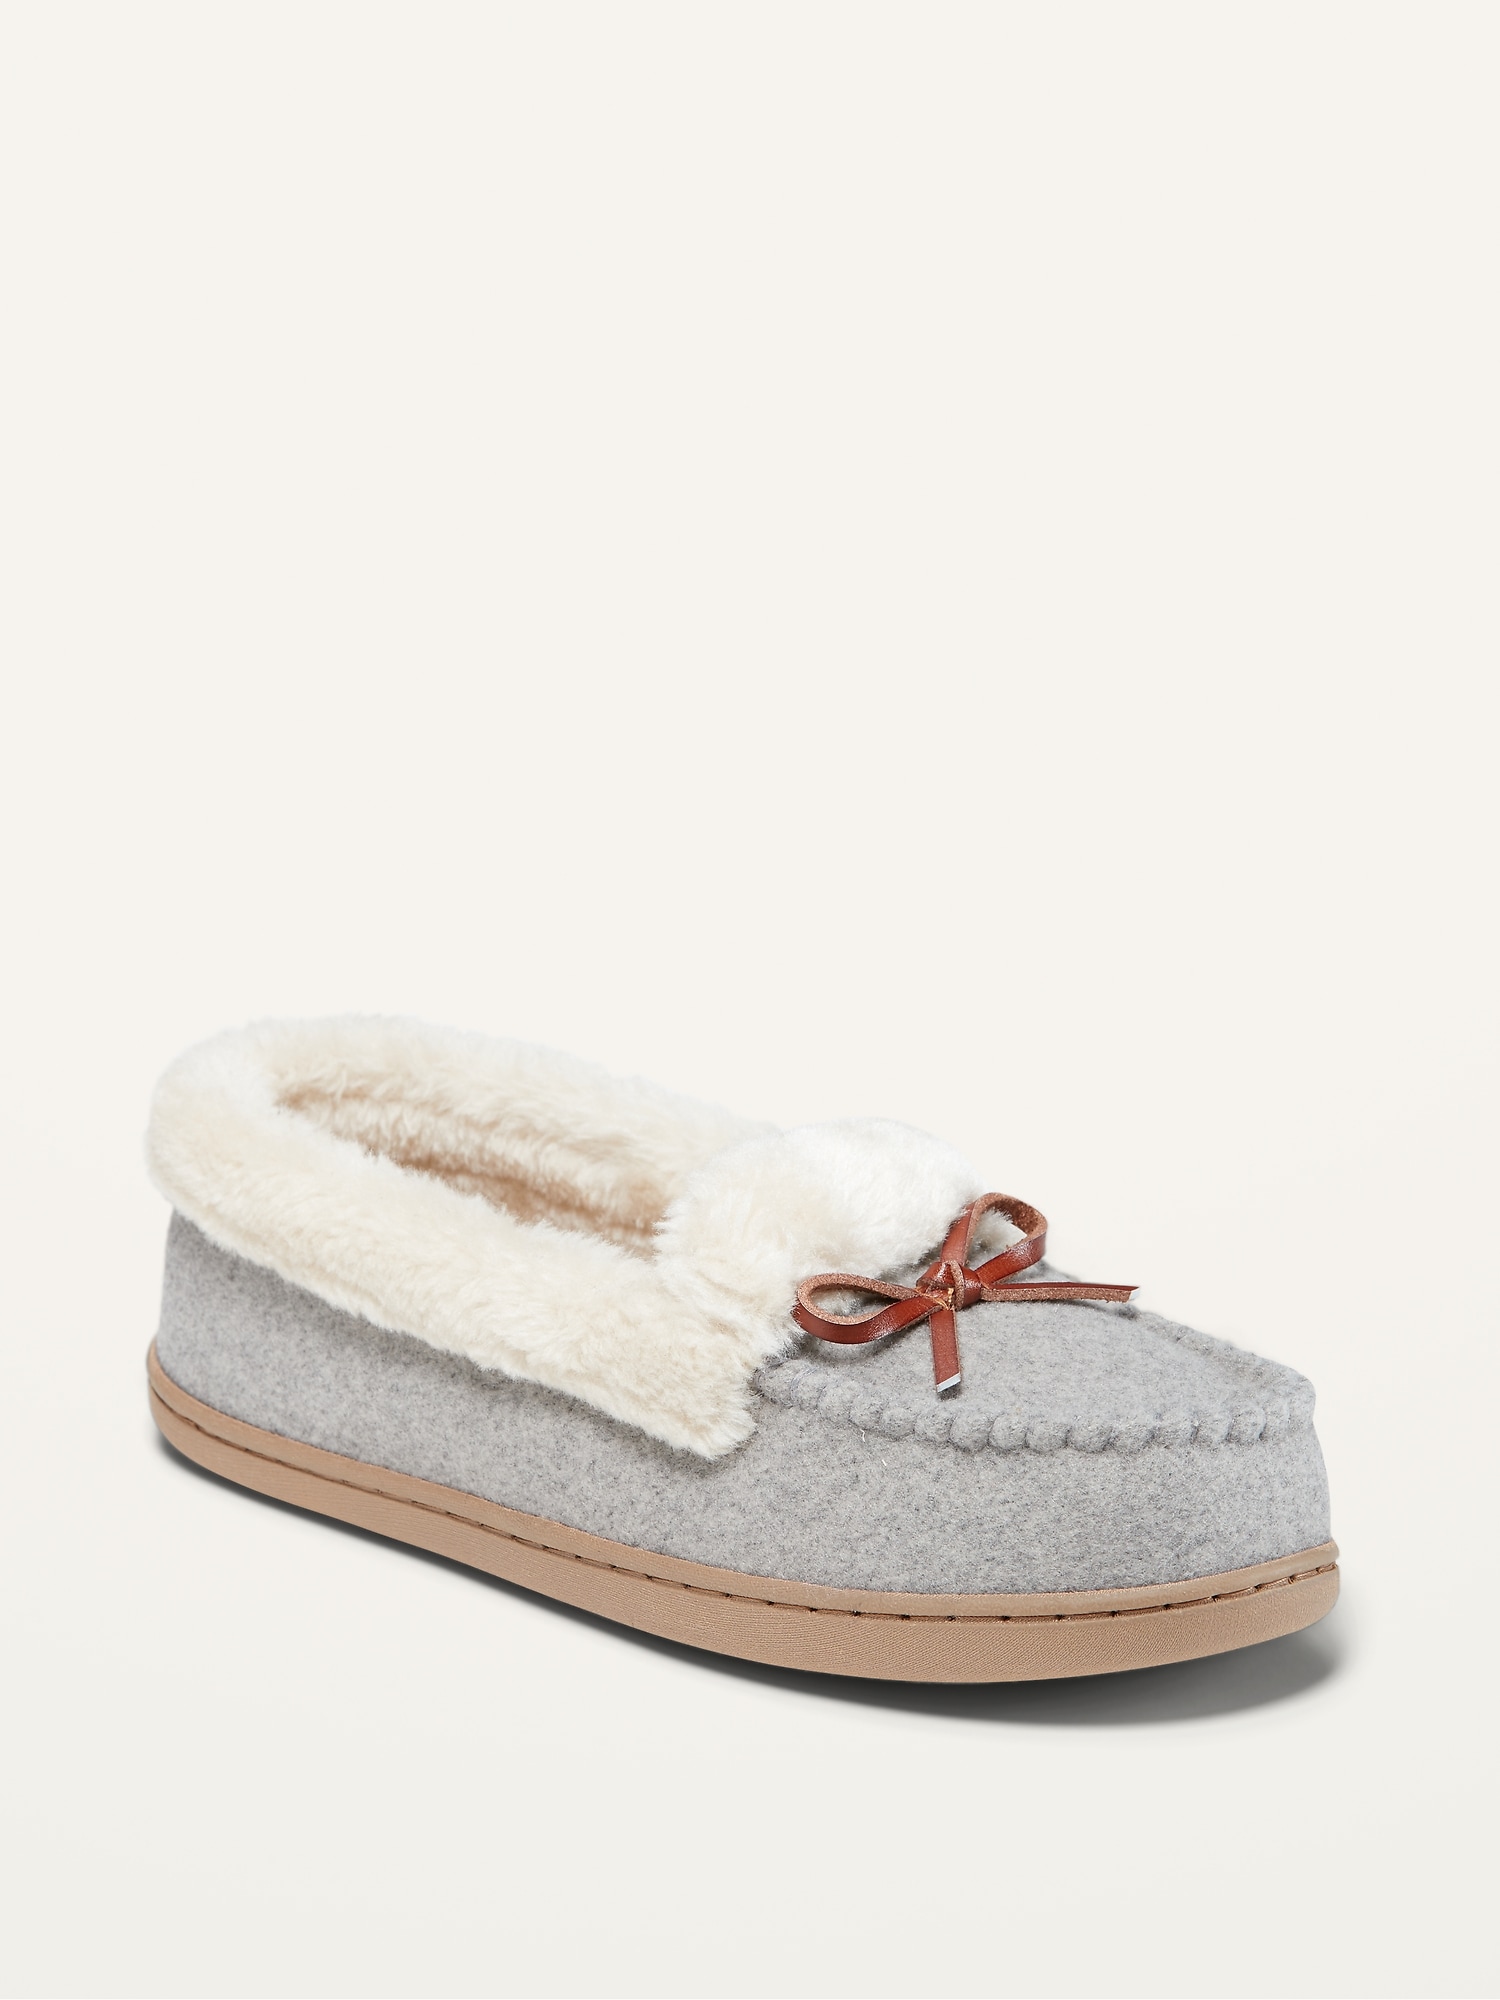 moccasins with fur lining